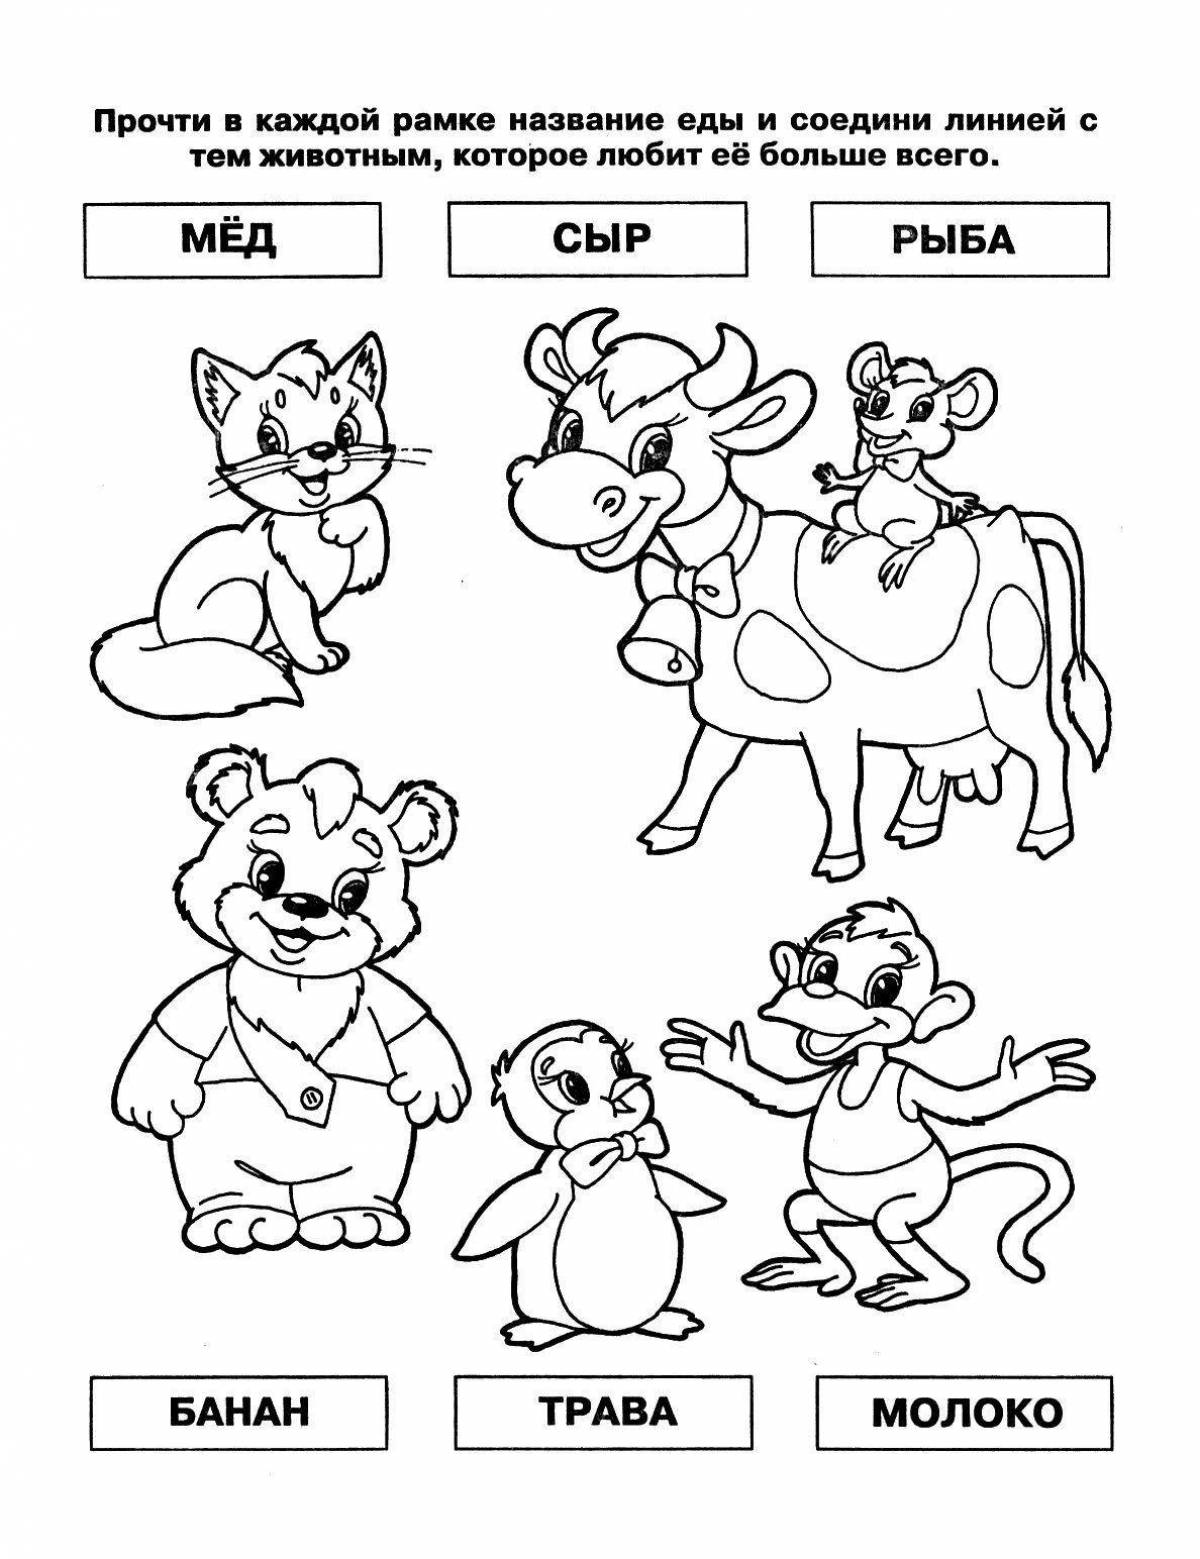 Fun coloring pages for preschoolers 6-7 years old